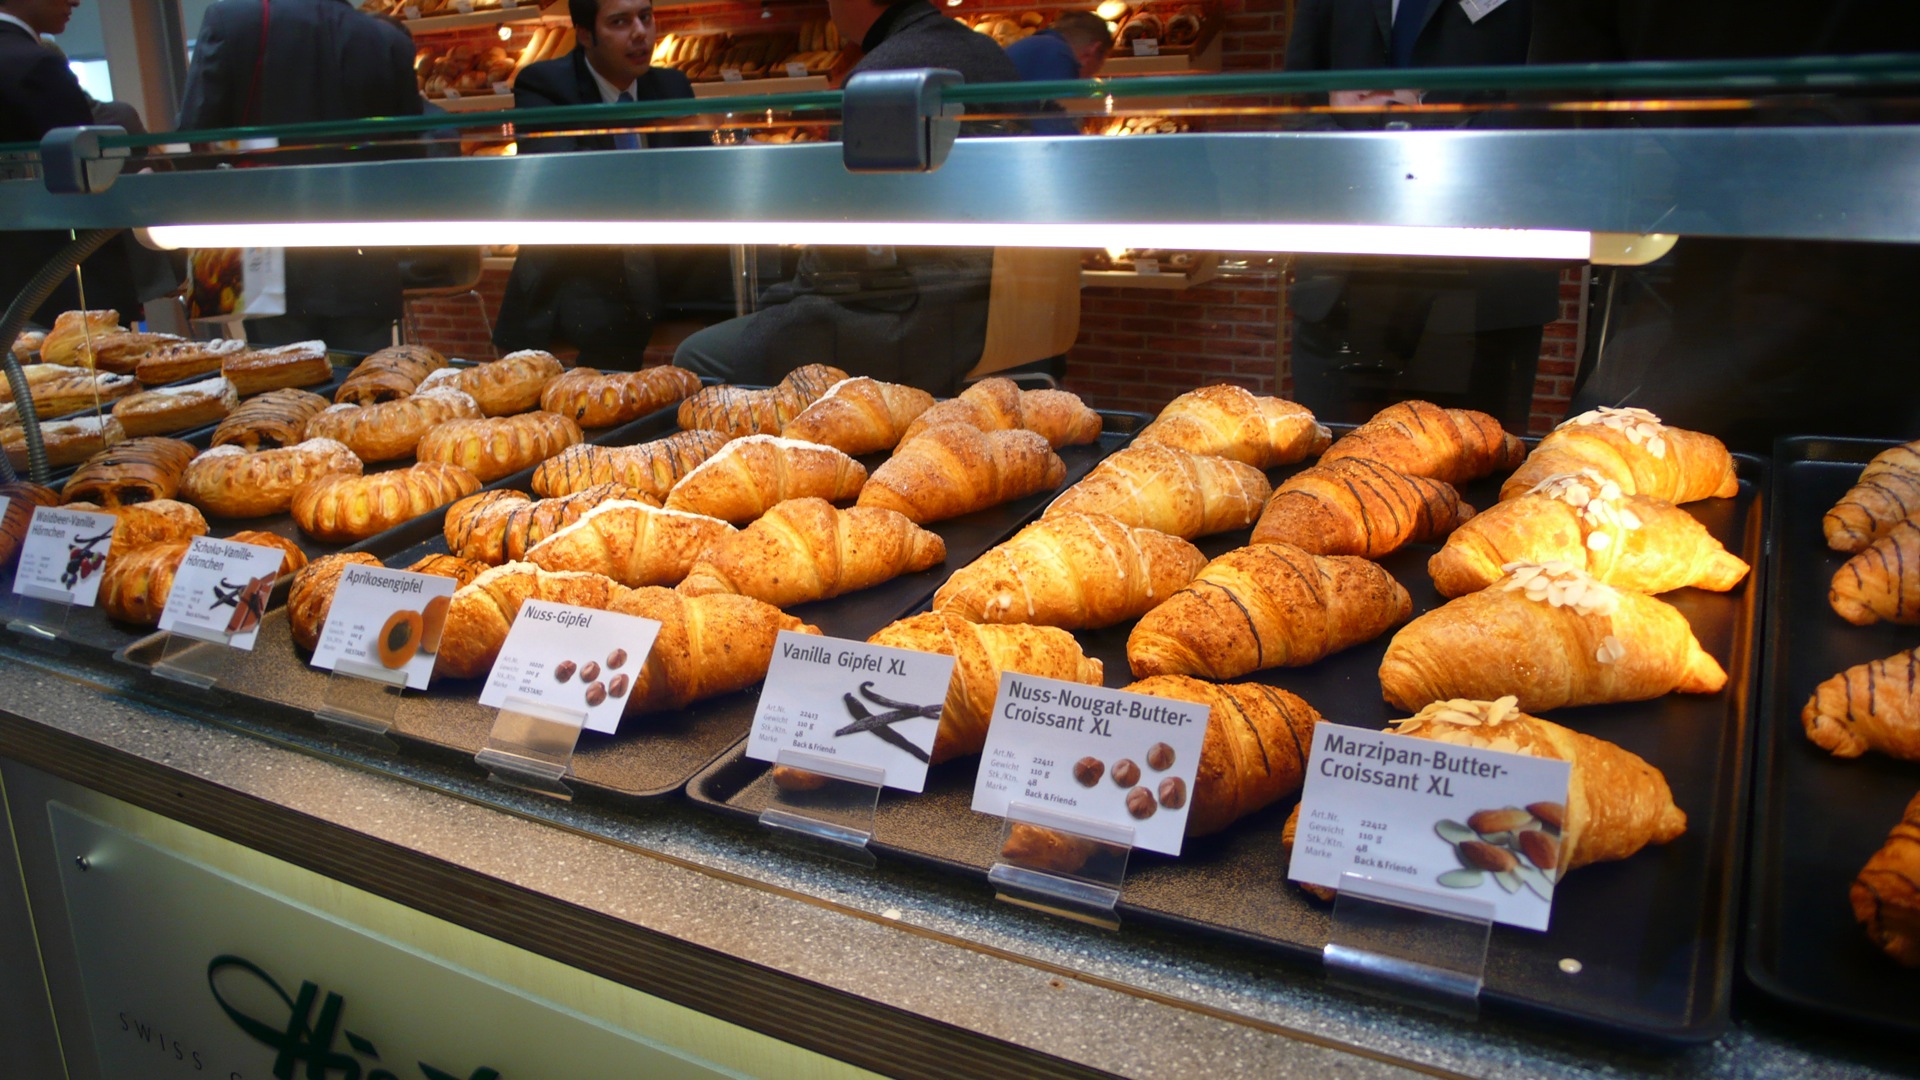 pastry items for sale at a display in a restaurant